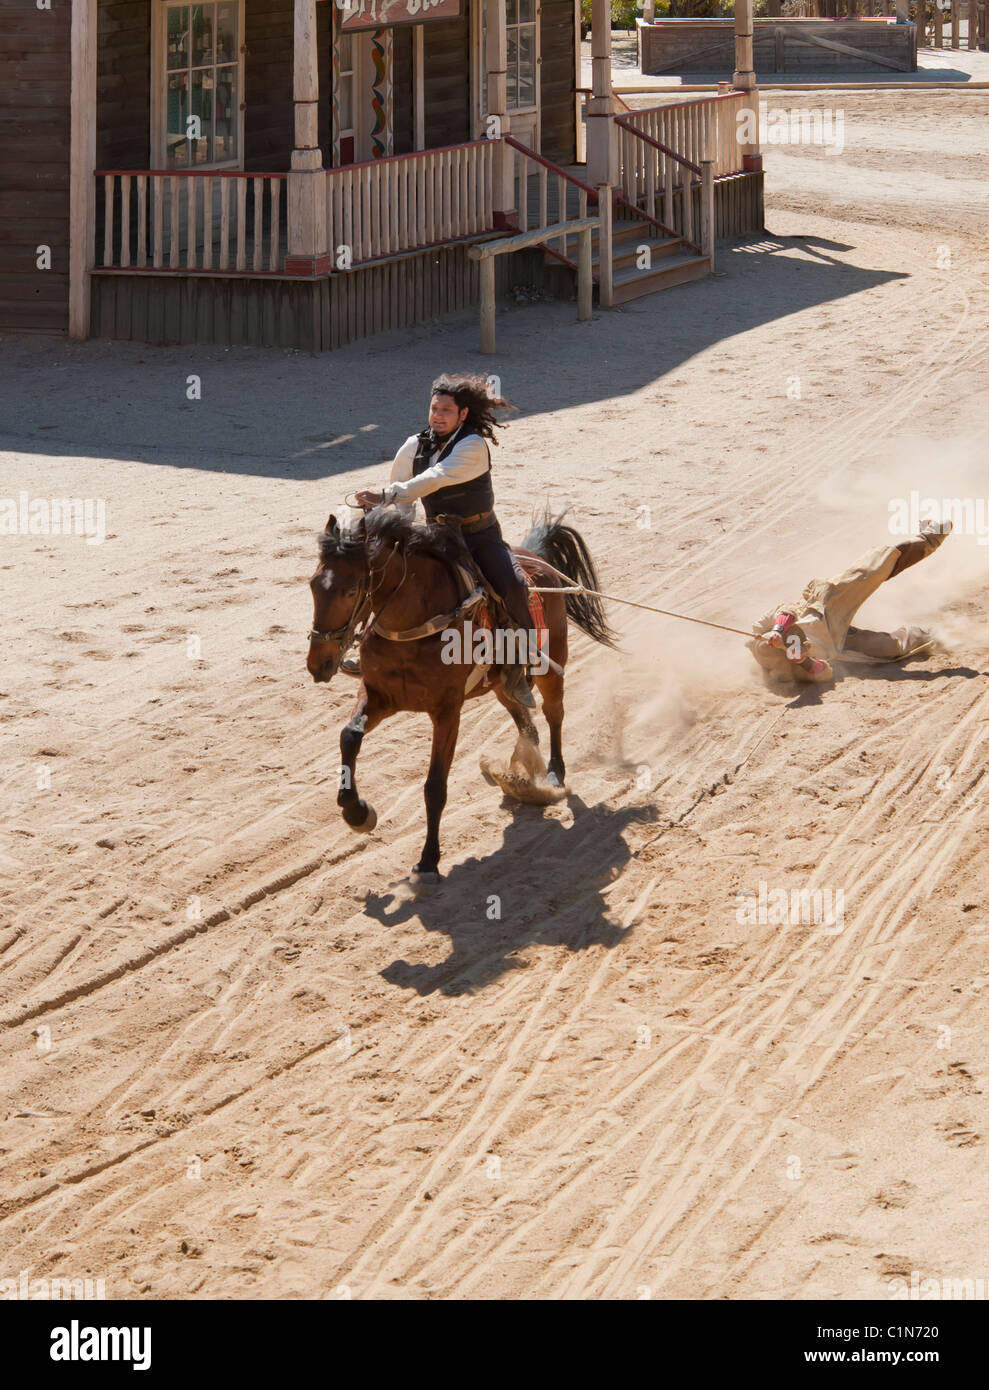 Deputy Sheriff dragging a Bandit by a rope from his horse at Mini Hollywood, Almeria, Andalusia, Spain Stock Photo